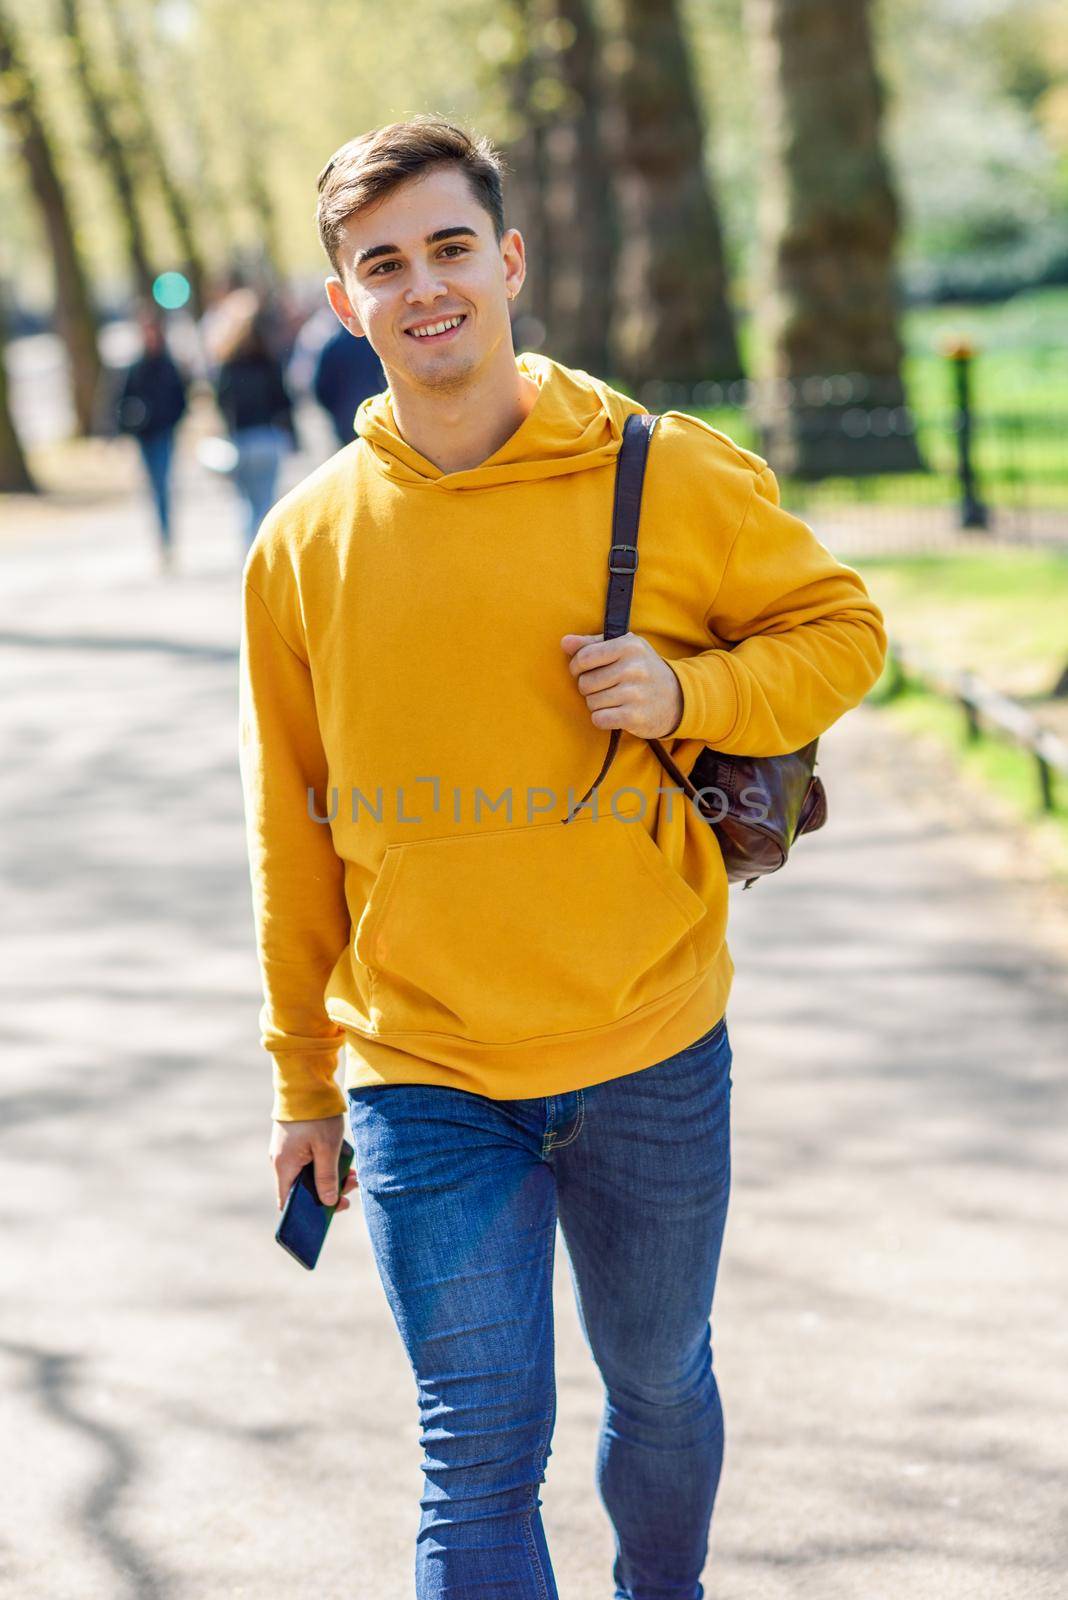 Young urban man using smartphone walking in street in an urban park in London. by javiindy